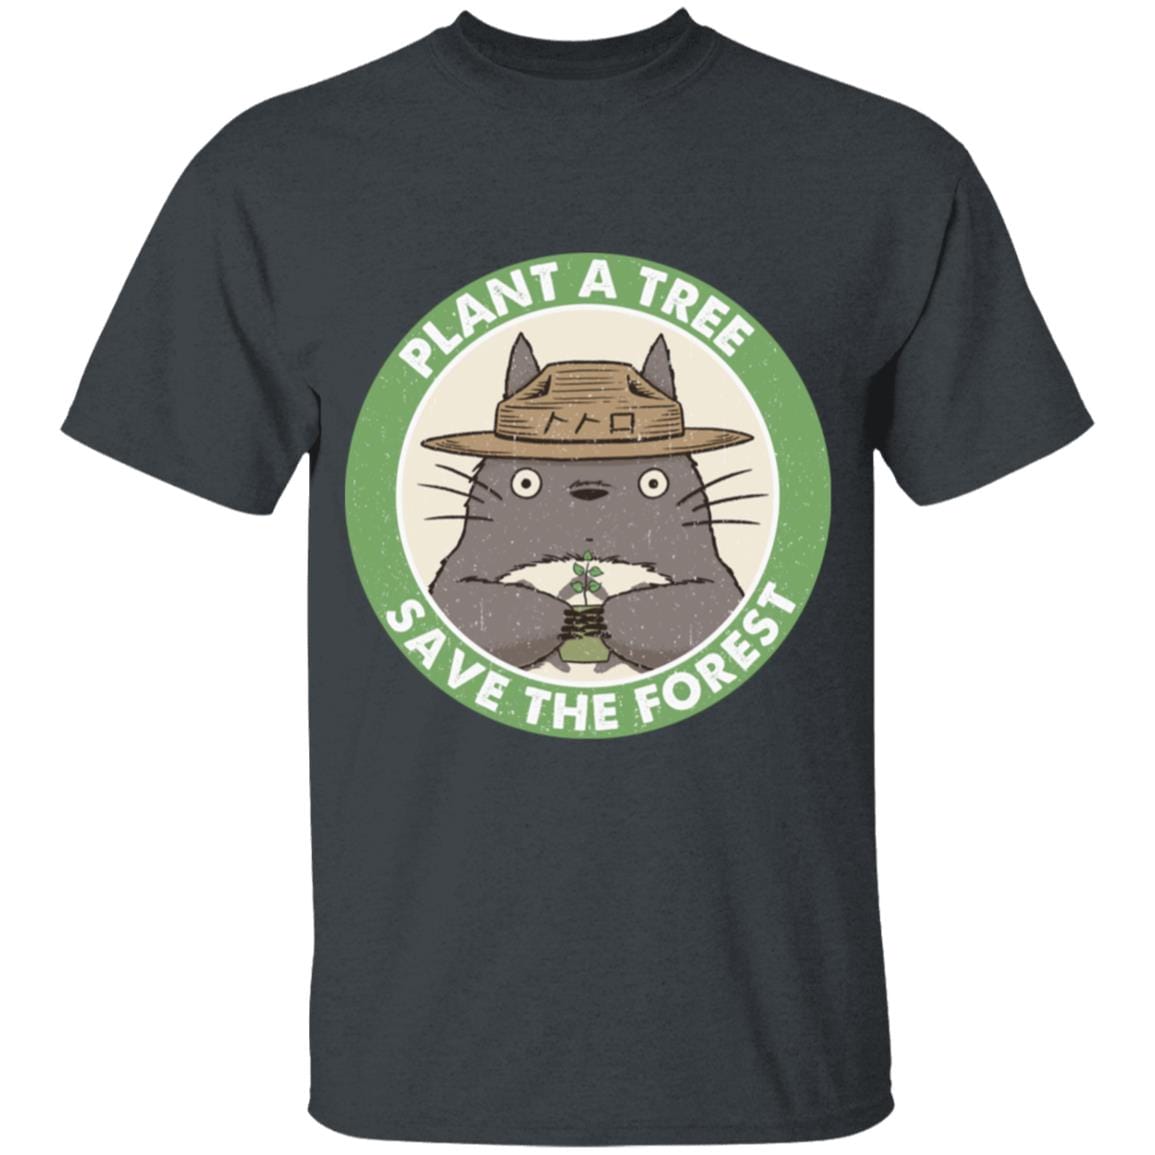 My Neighbor Totoro – Plant a Tree Save the Forest Kid T Shirt